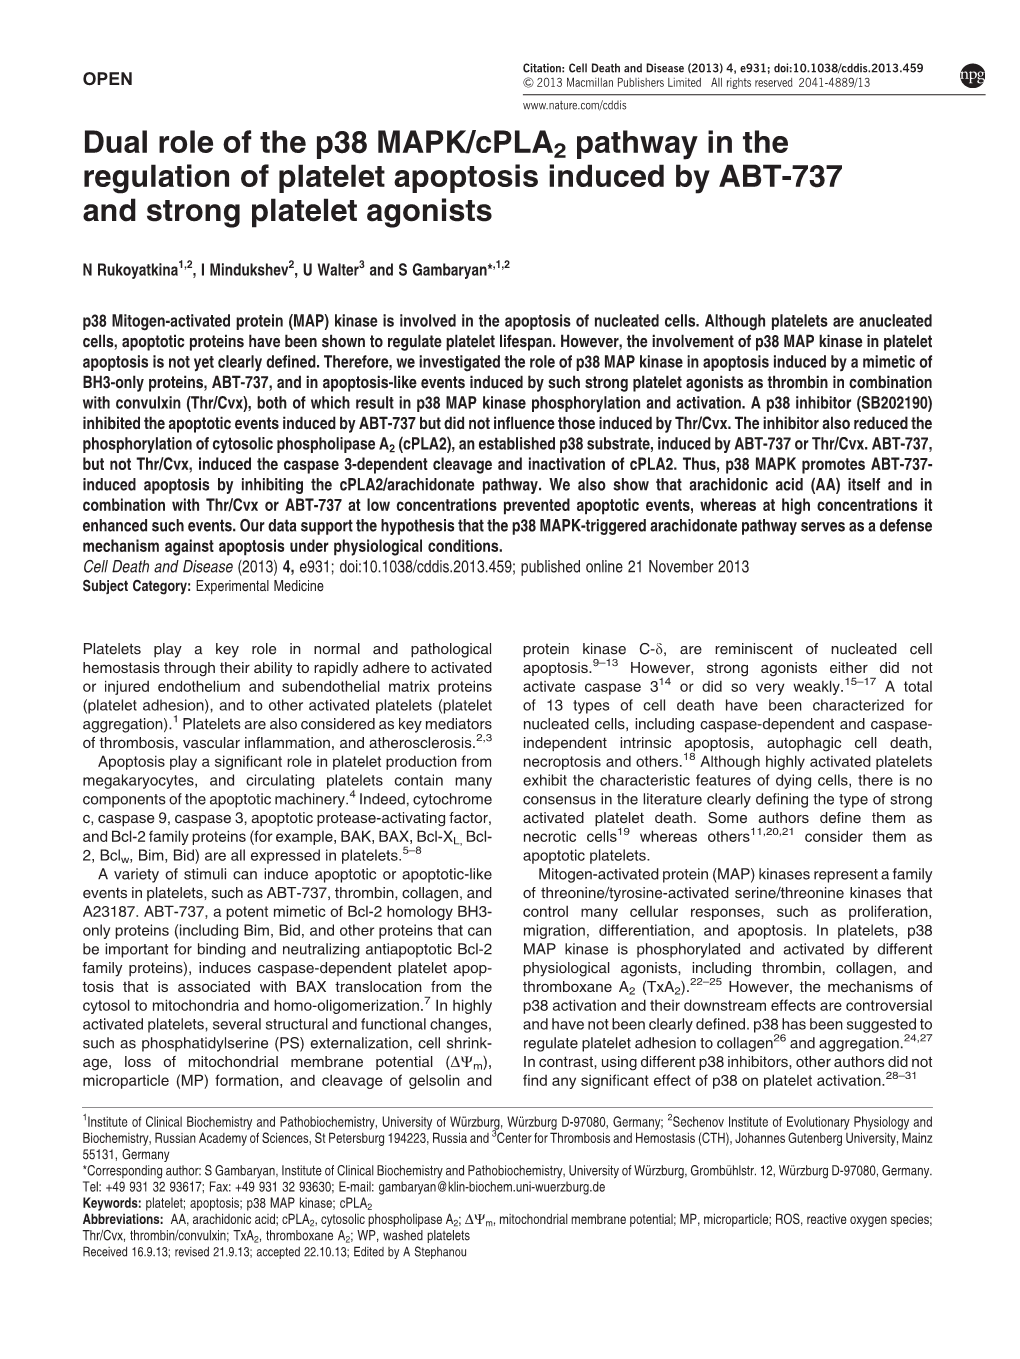 Cpla2pathway in the Regulation of Platelet Apoptosis Induced by ABT